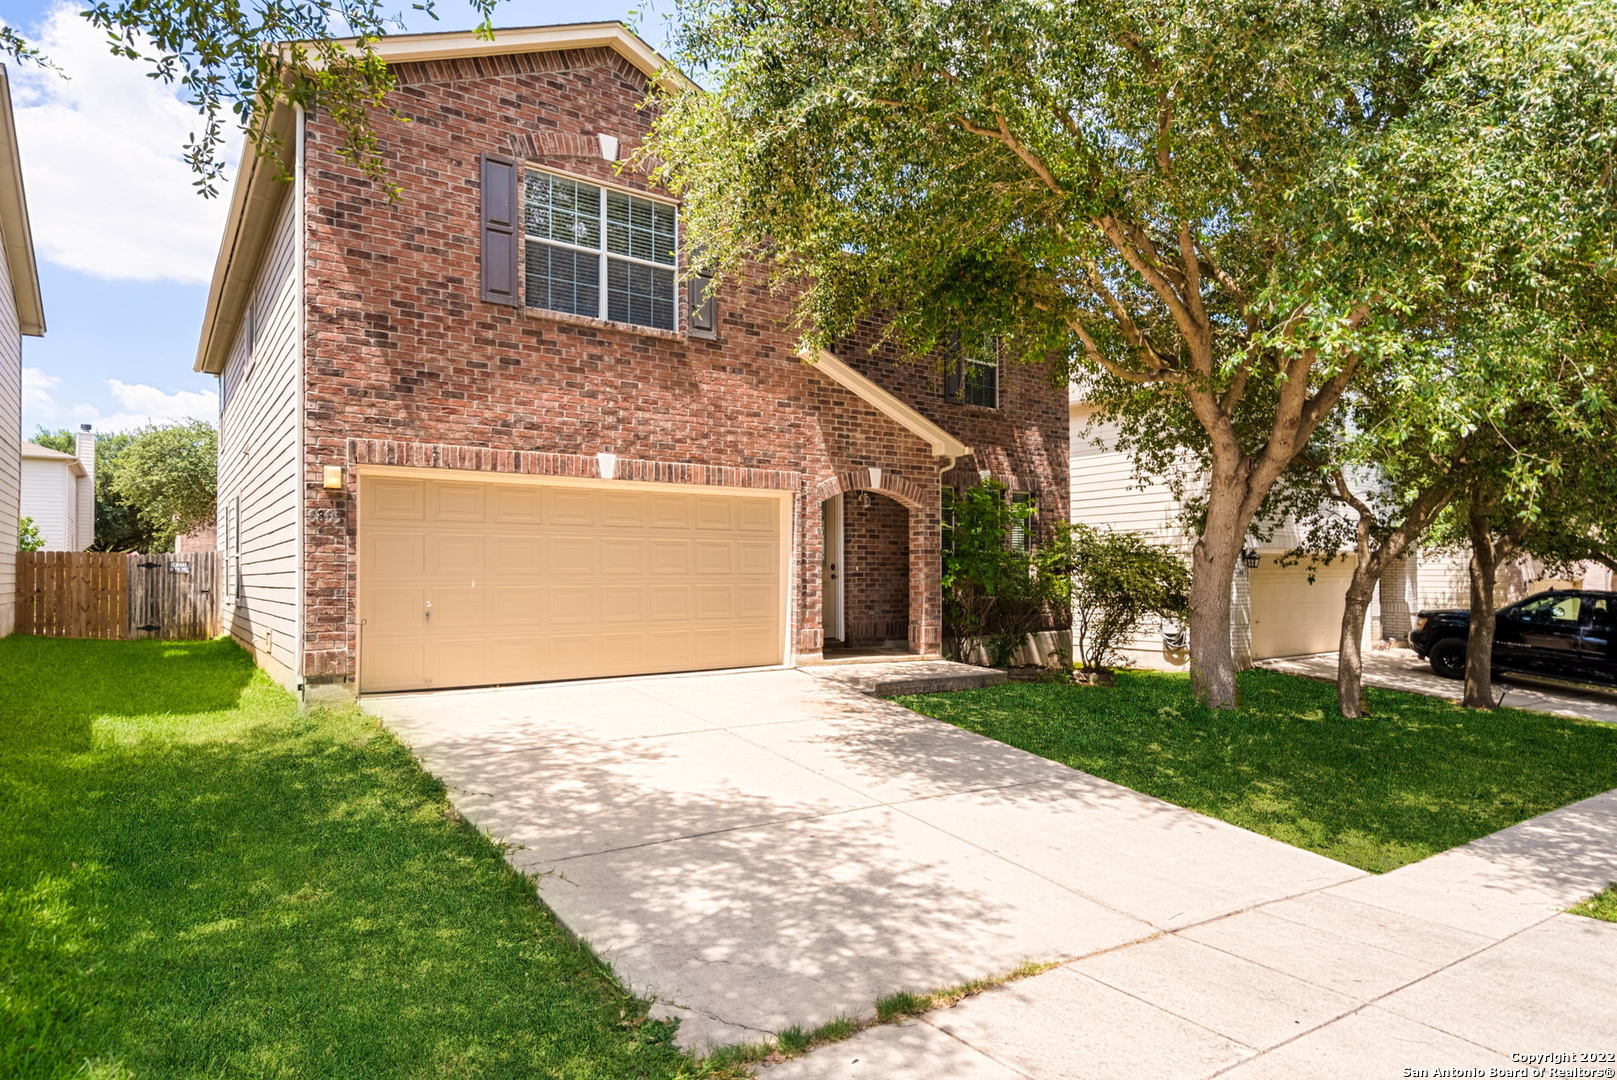 3194 SQFT 4 BEDS AND 2 1/2 BATH. EASY TO COMMUTE EVERYWHERE, IT ONLY TAKES 7 MINUTES TO 1604/I-35, AND 8 MINUTES TO 410. SAM'S CLUB IS 2MILES AWAY. The refrigerator conveys! *Openhouse on 07/02 from 11 AM to 3PM*